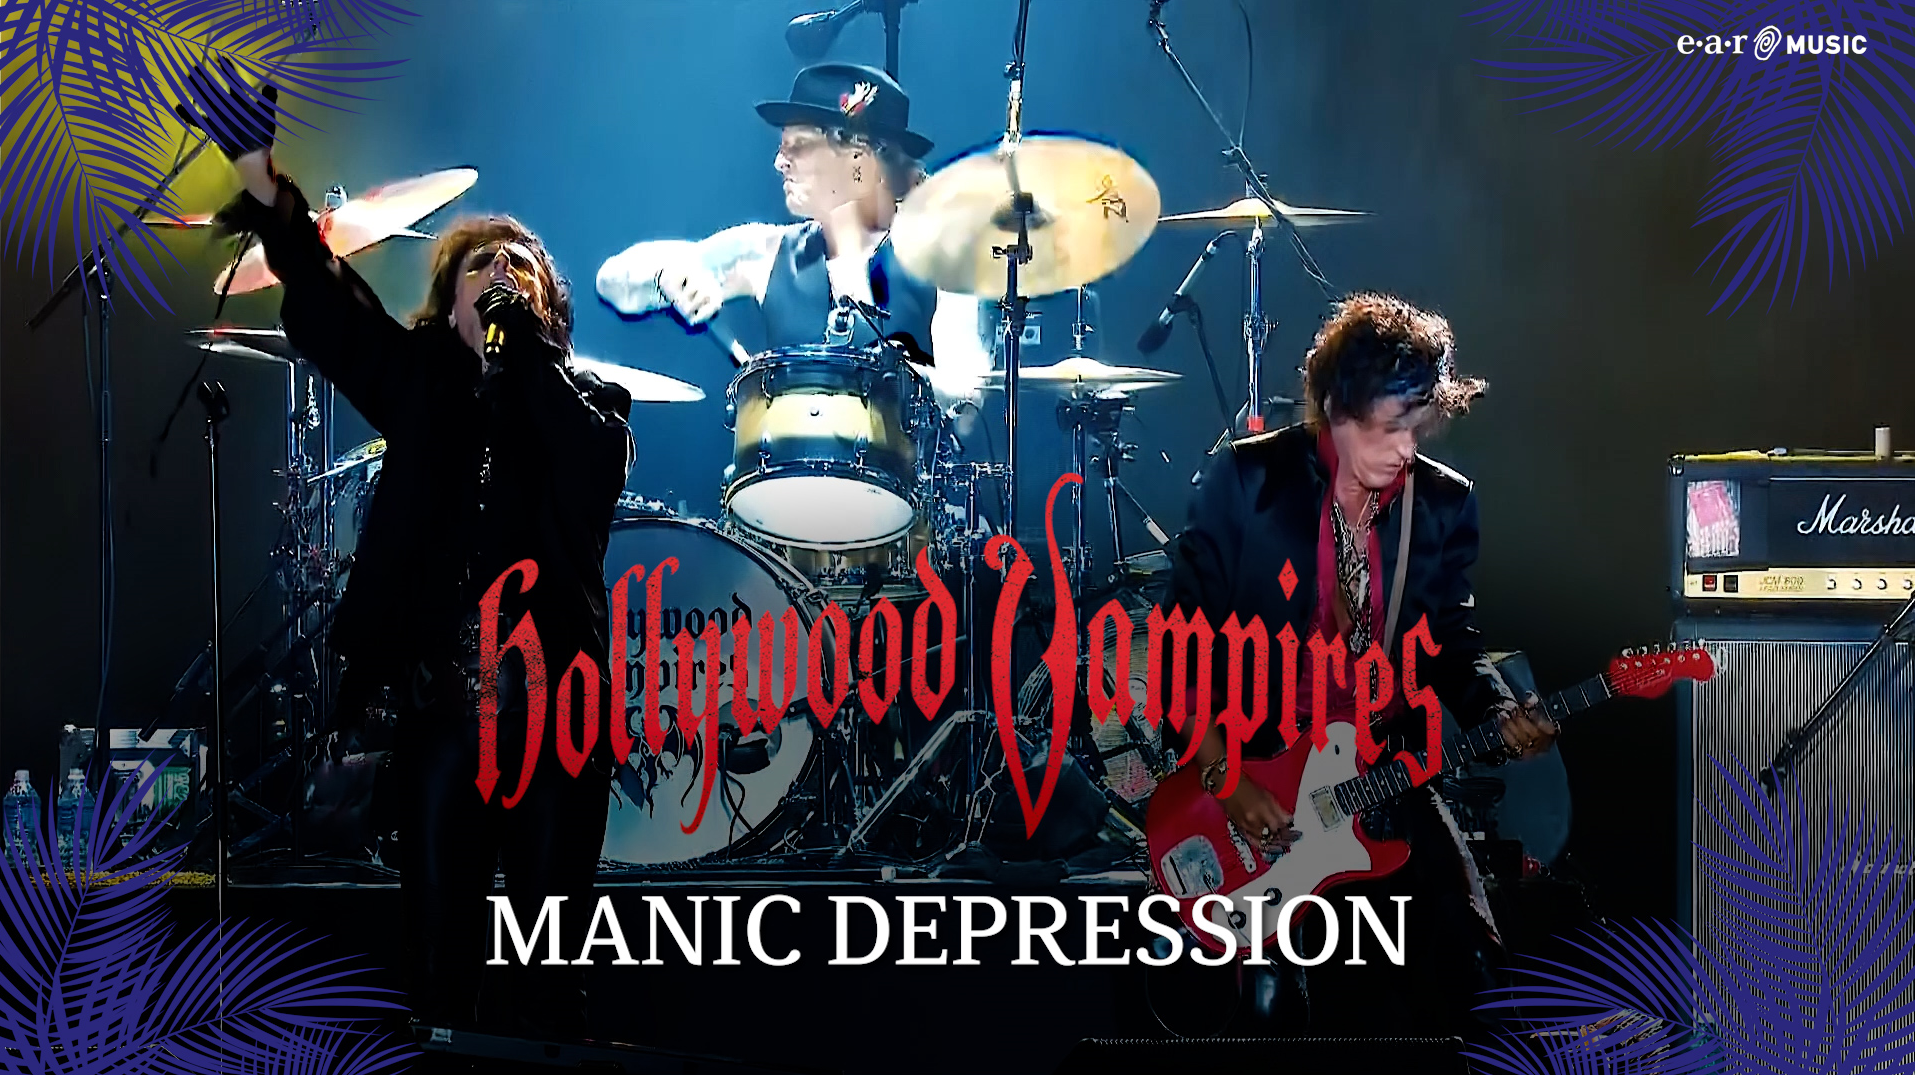 Hollywood Vampires Share "Manic Depression (Live In Rio)" Video